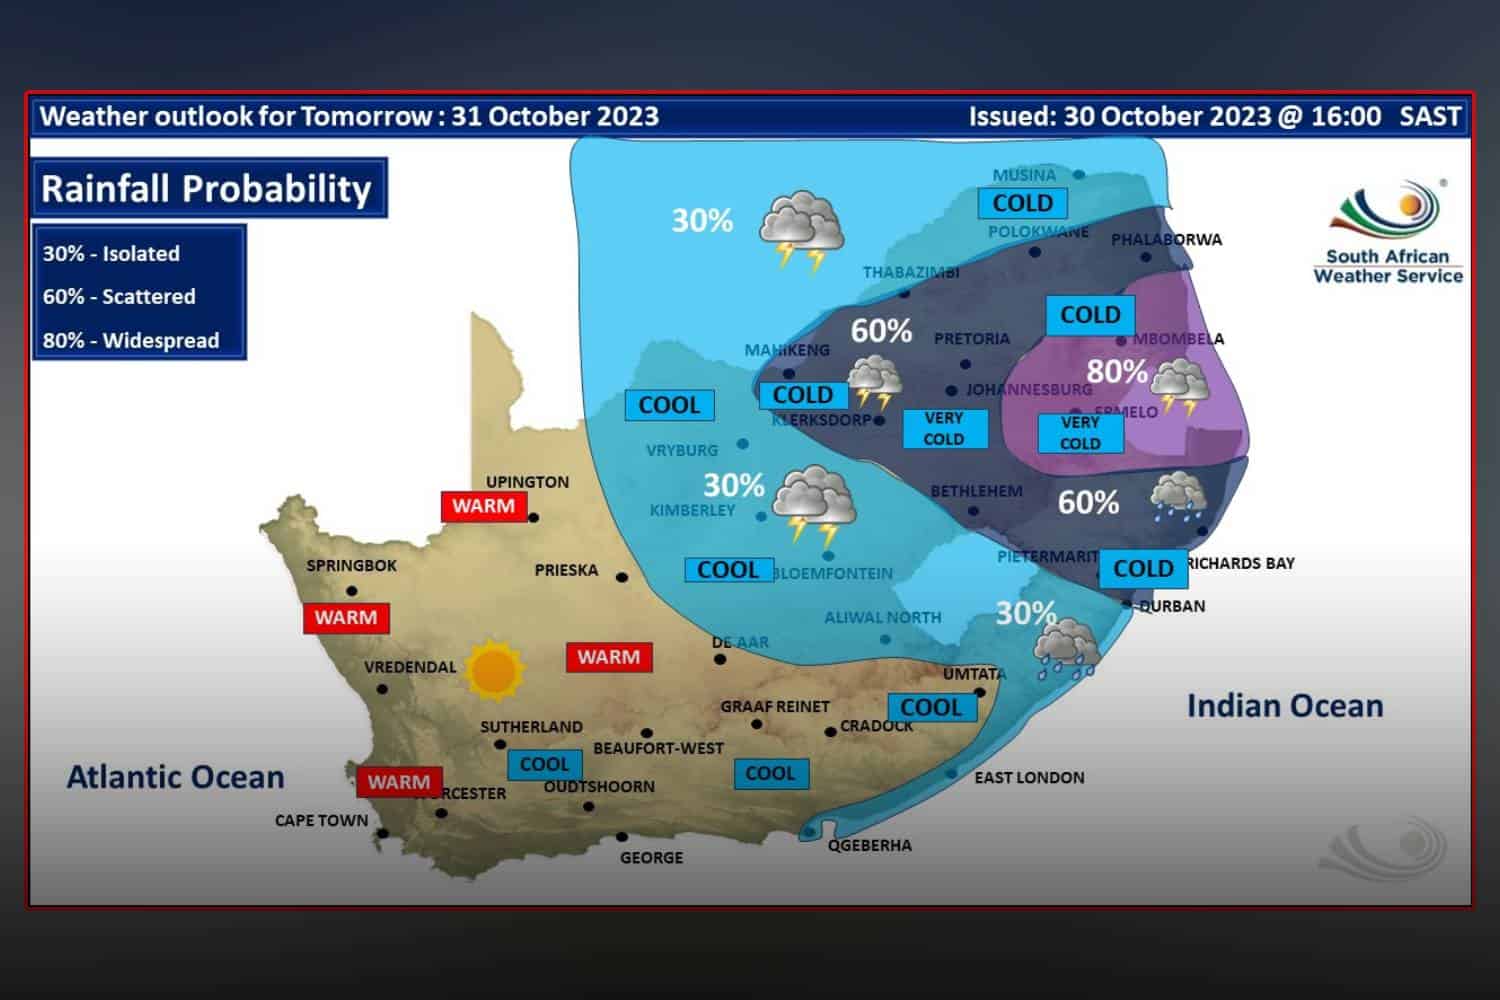 South Africa weather forecast Tuesday 31 October 2023